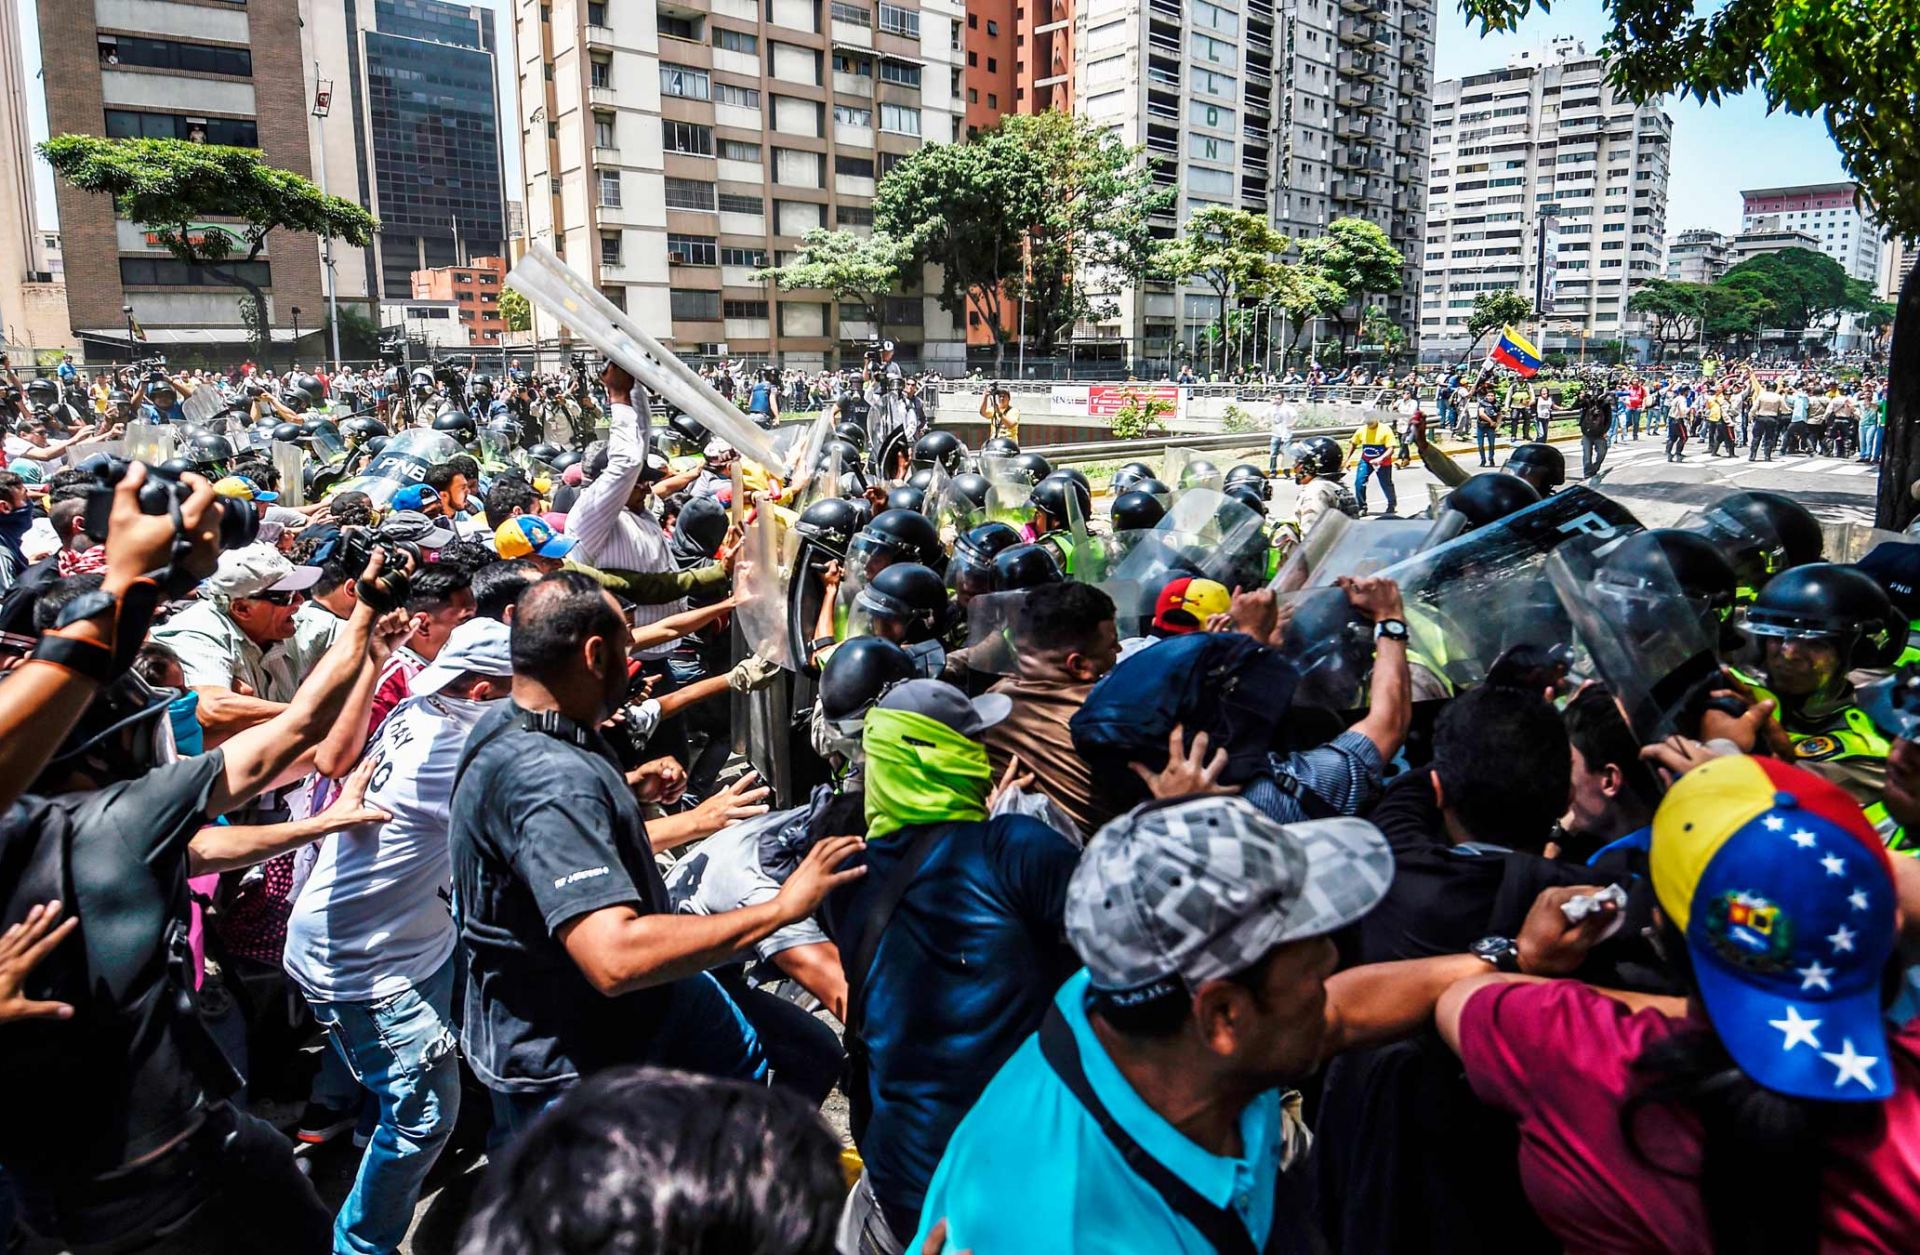 A default by Petroleos de Venezuela on its debt would likely hamper oil production, leading to tighter food supplies and stirring up further unrest in Venezuela.